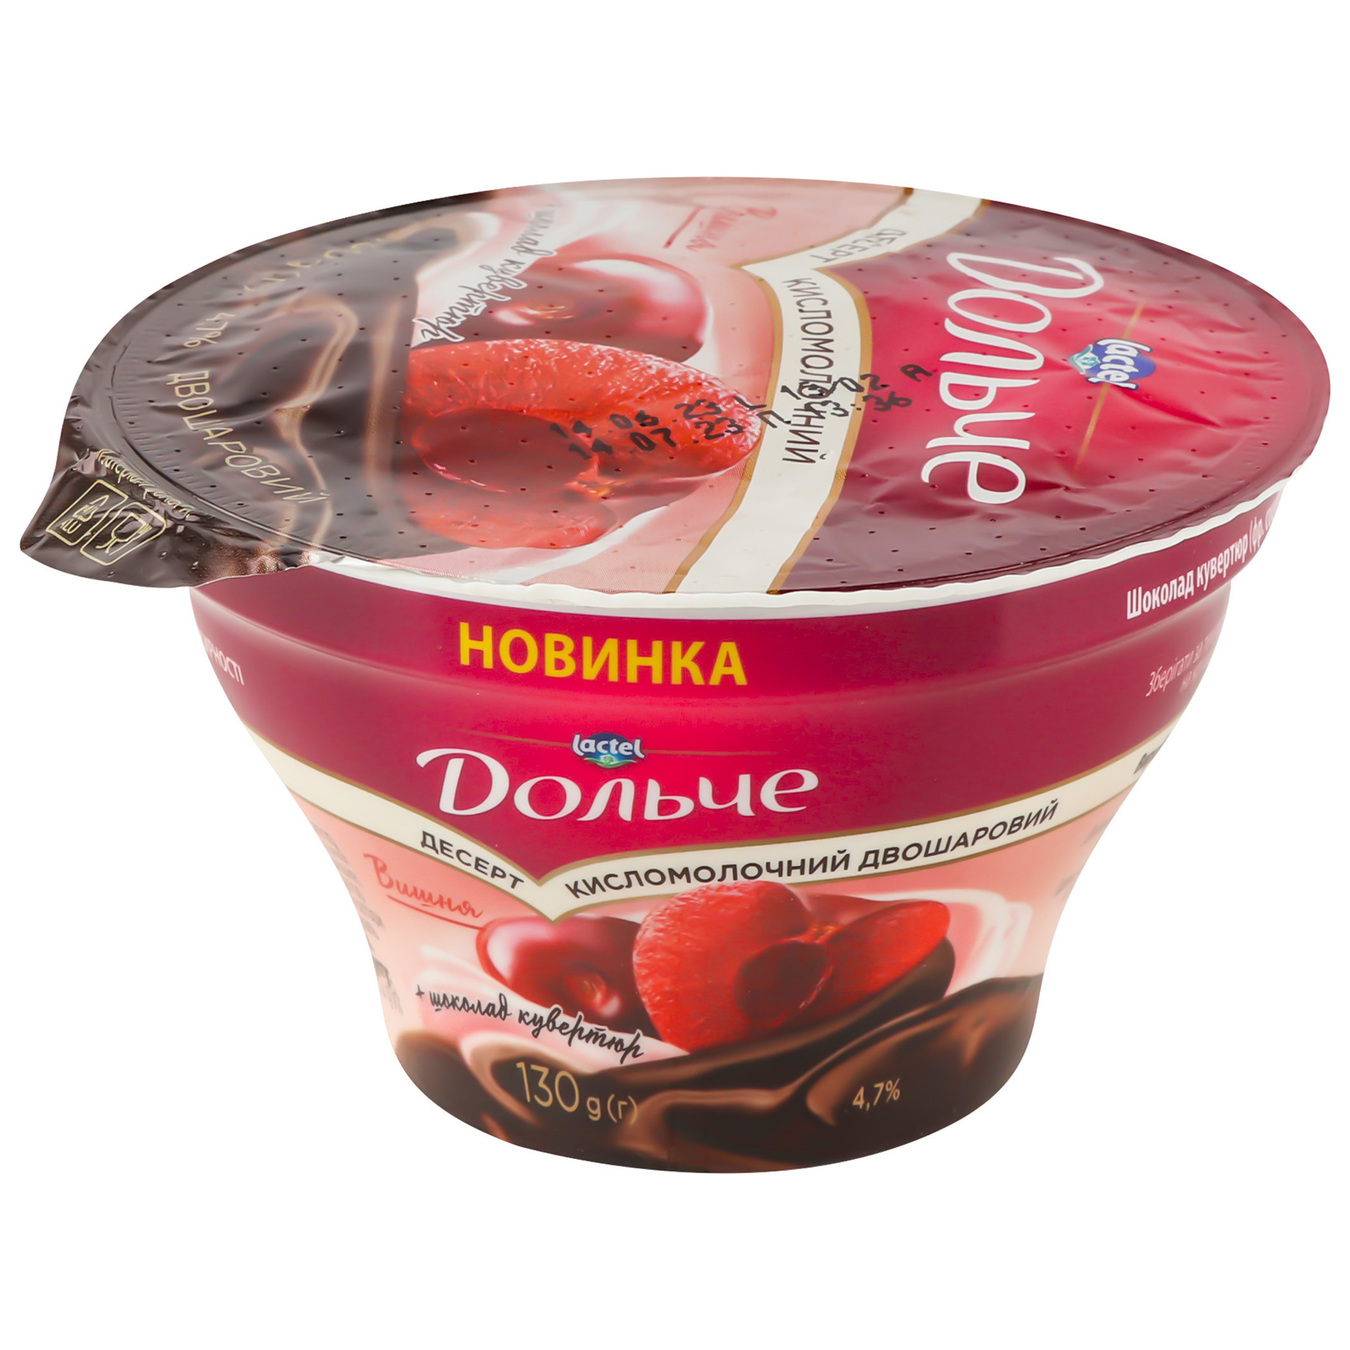 Dolce dessert with chocolate couverture and cherry fillings cup 4.7% 130g 4